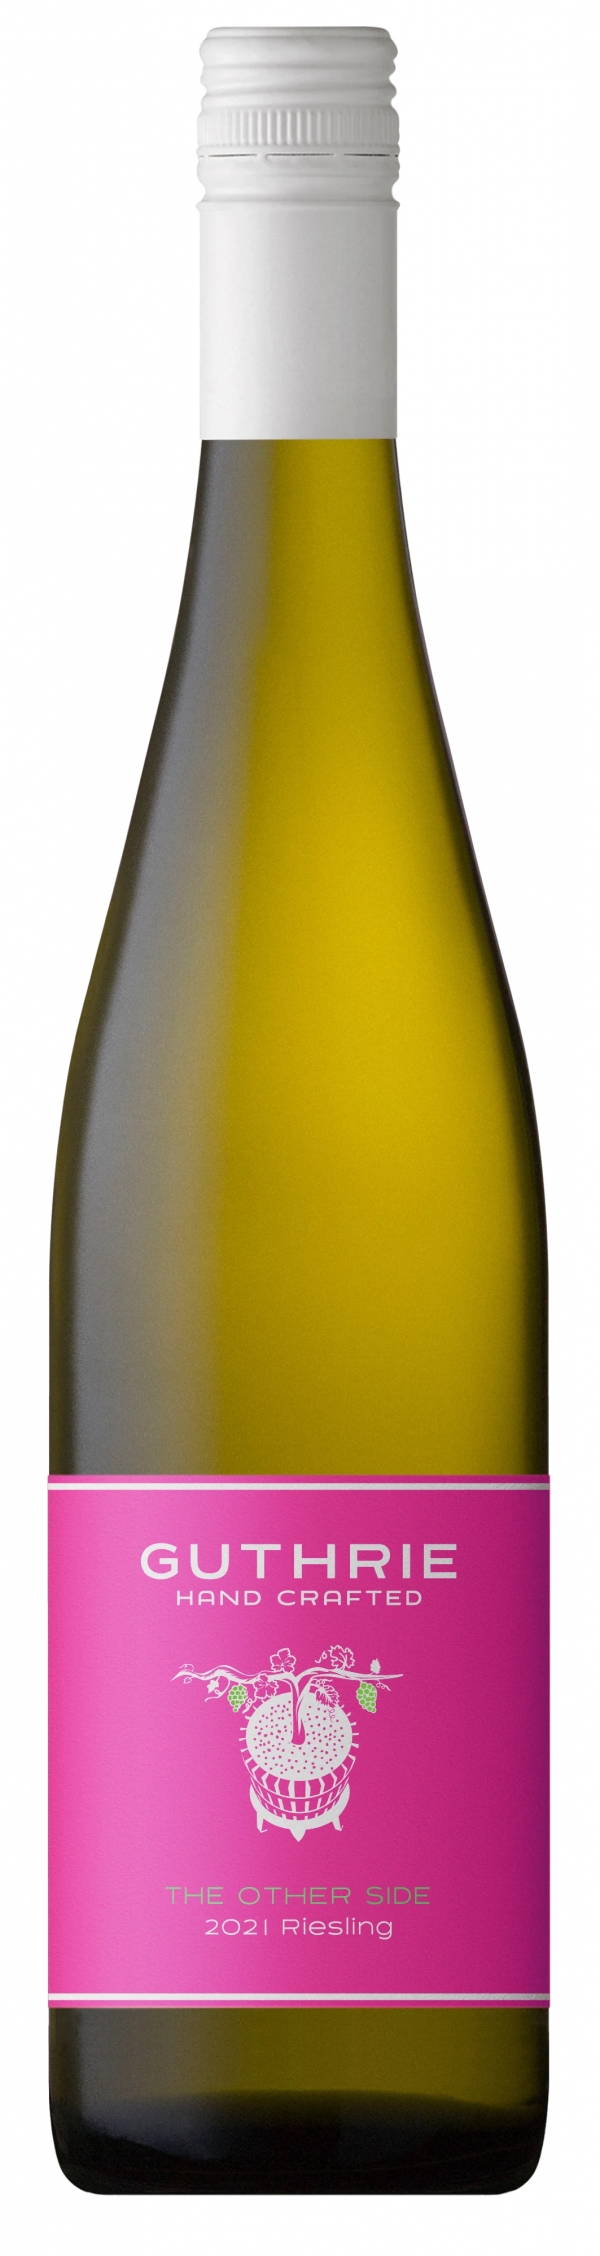 Guthrie Wines 'The Other Side' Riesling Bottle